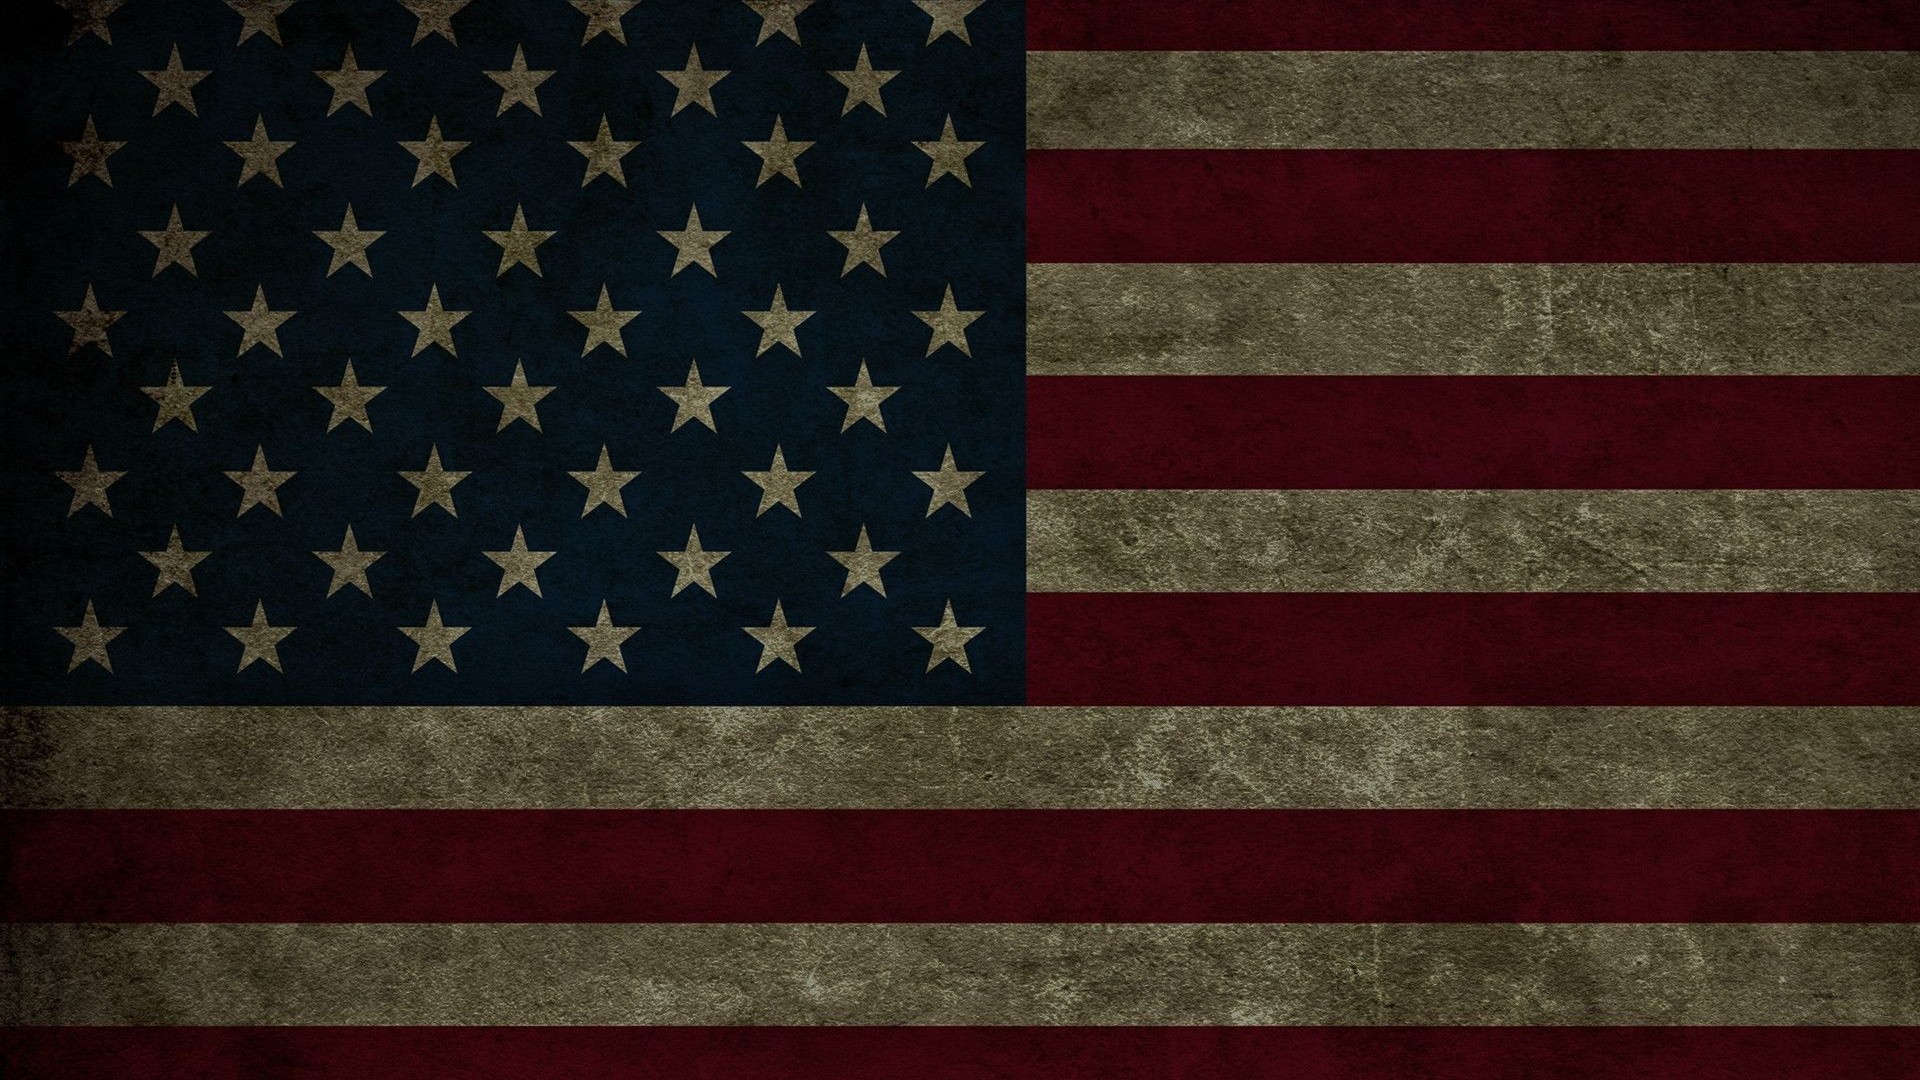 Wallpaper American Flag Desktop with high-resolution 1920x1080 pixel. You can use this wallpaper for your Windows and Mac OS computers as well as your Android and iPhone smartphones